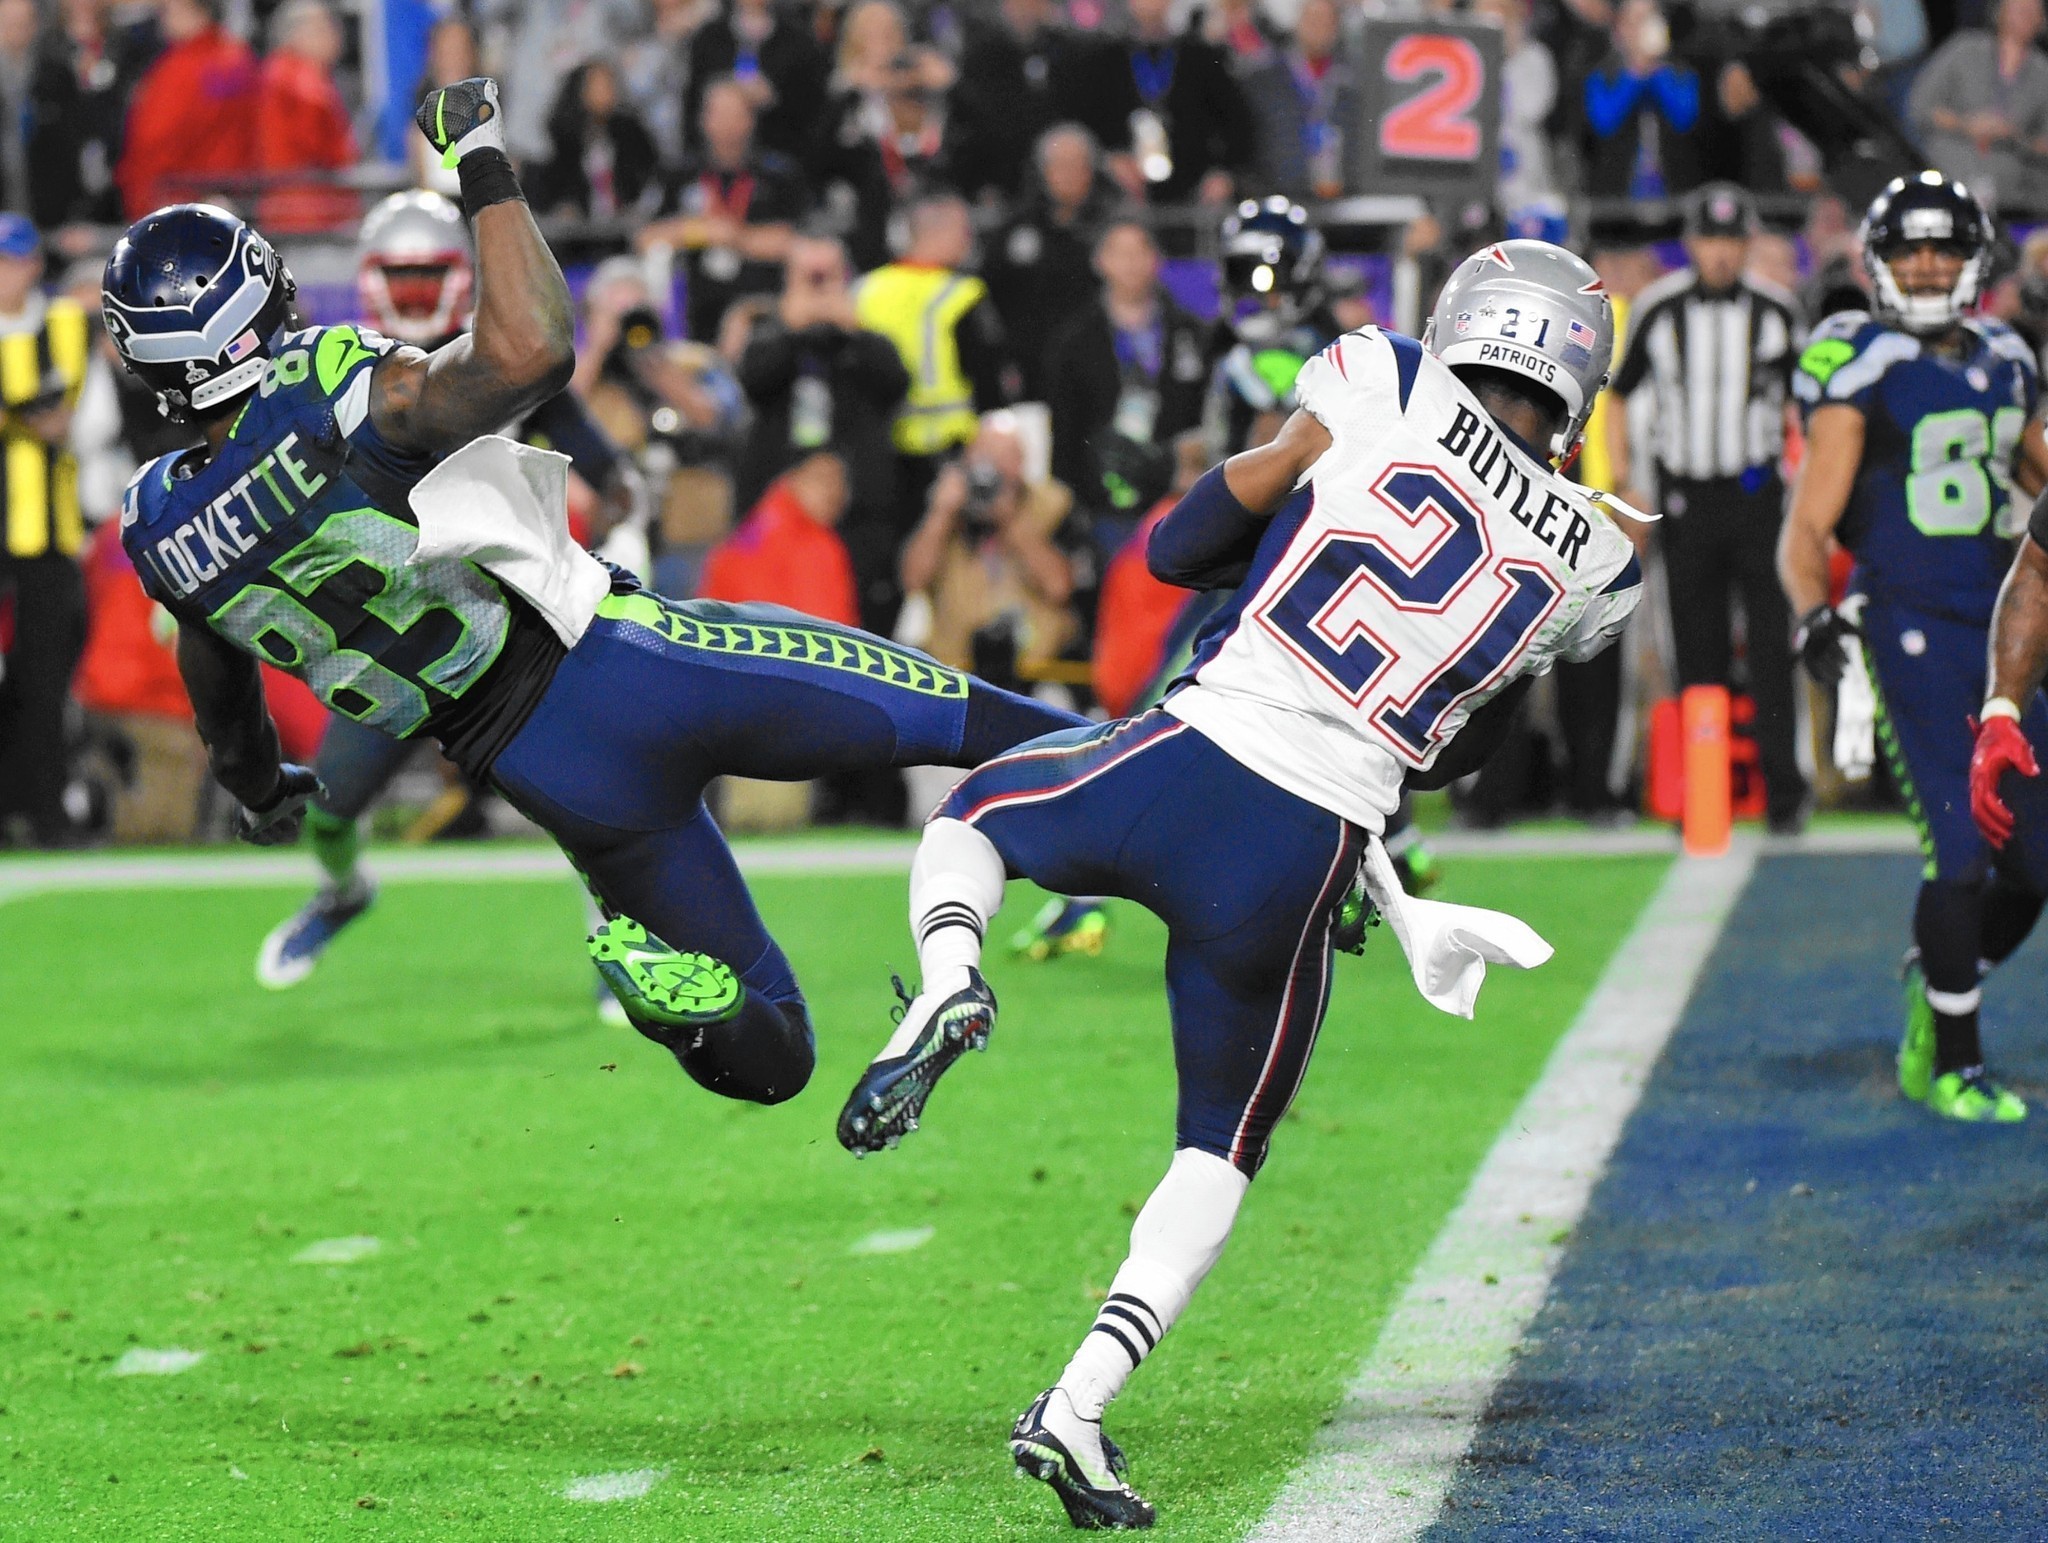 Cris Collinsworth shined as much as the Patriots in NBC's Super Bowl coverage - The ...